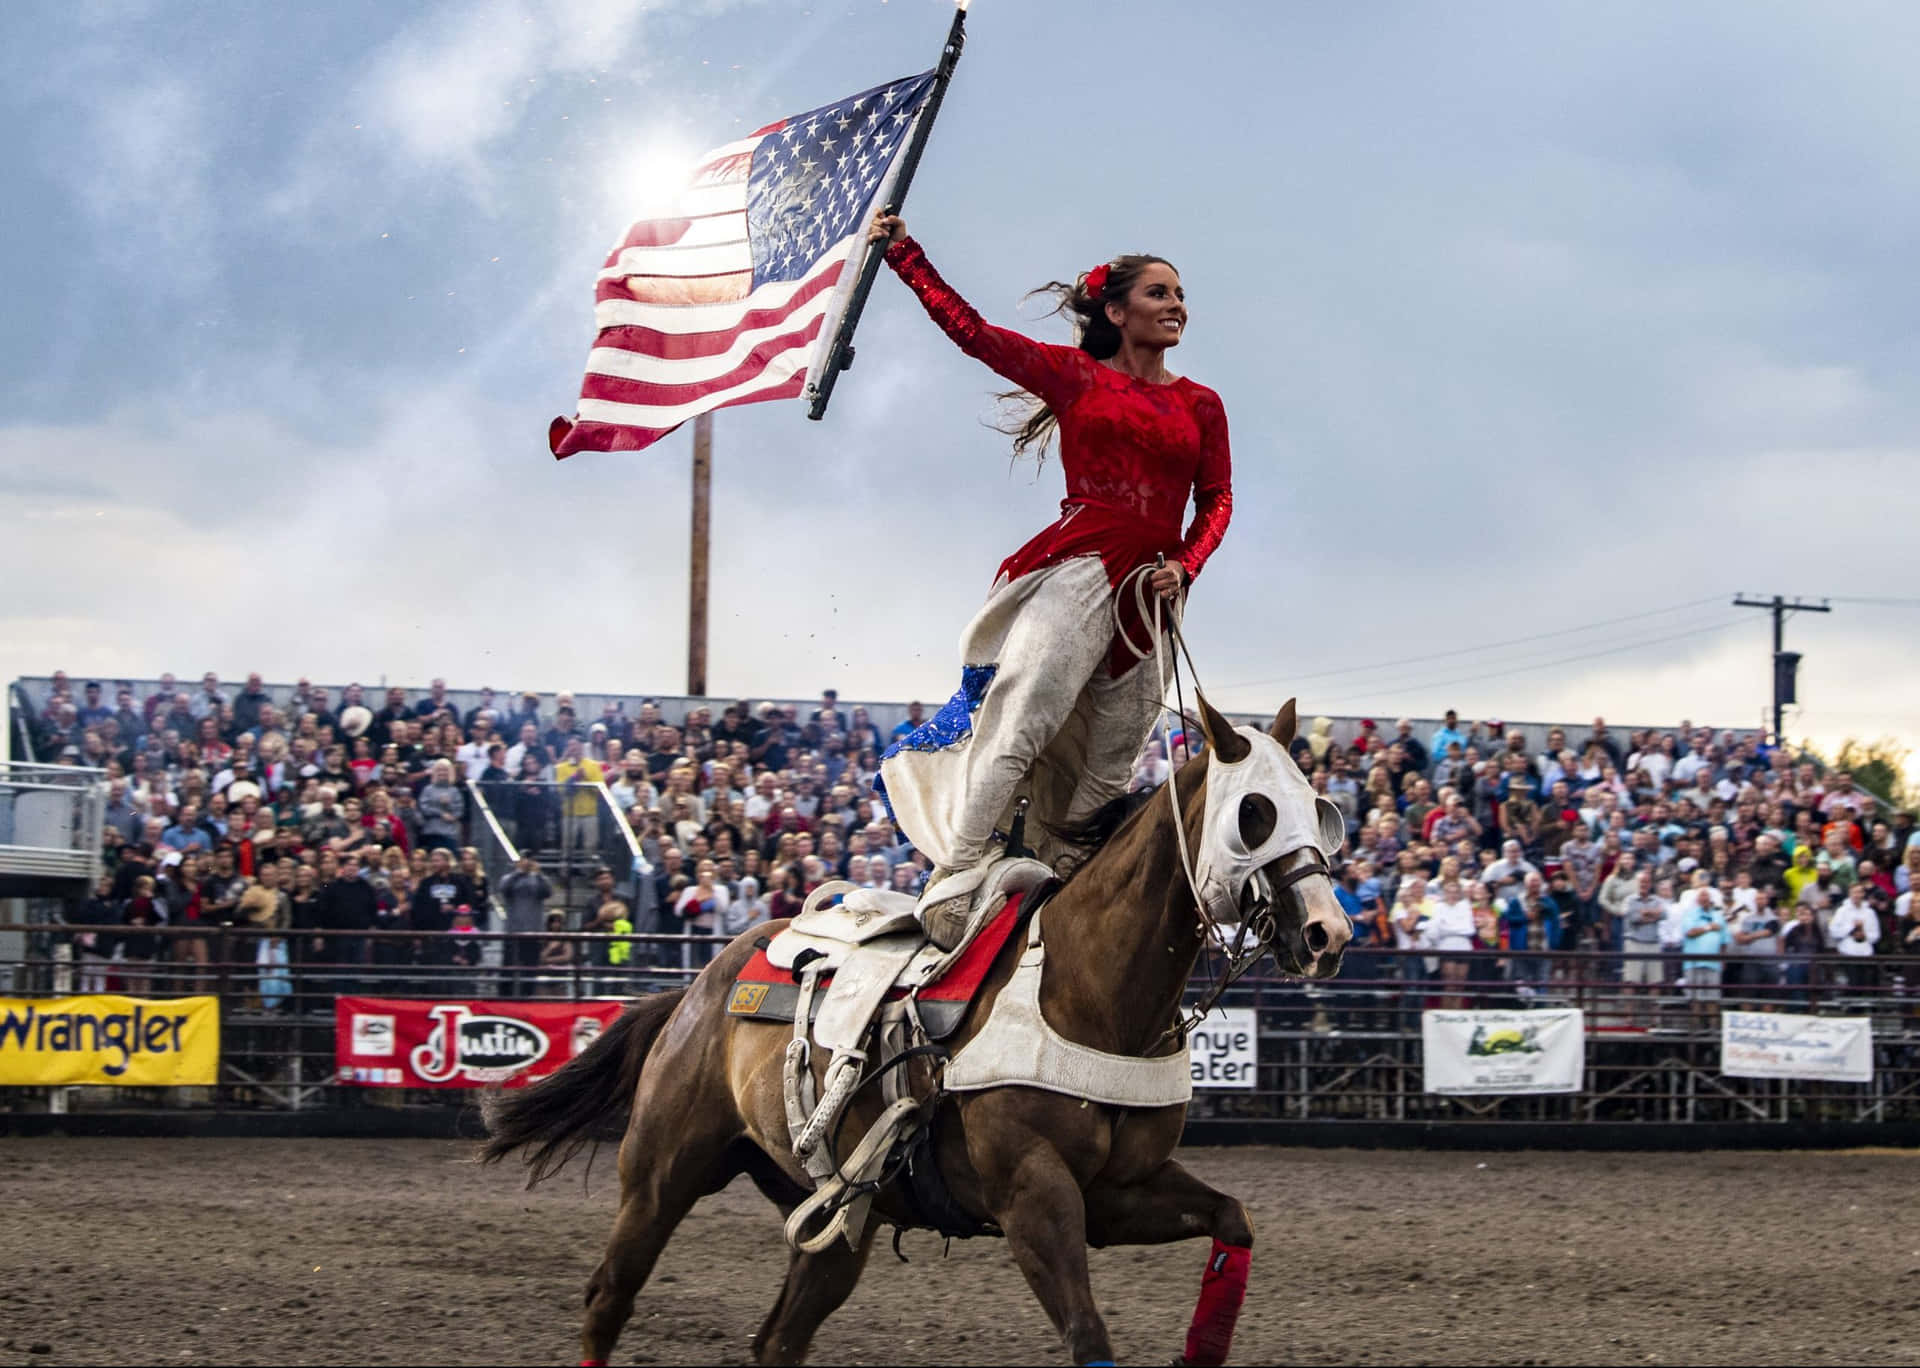 Feel the thrill of competition with the rodeo